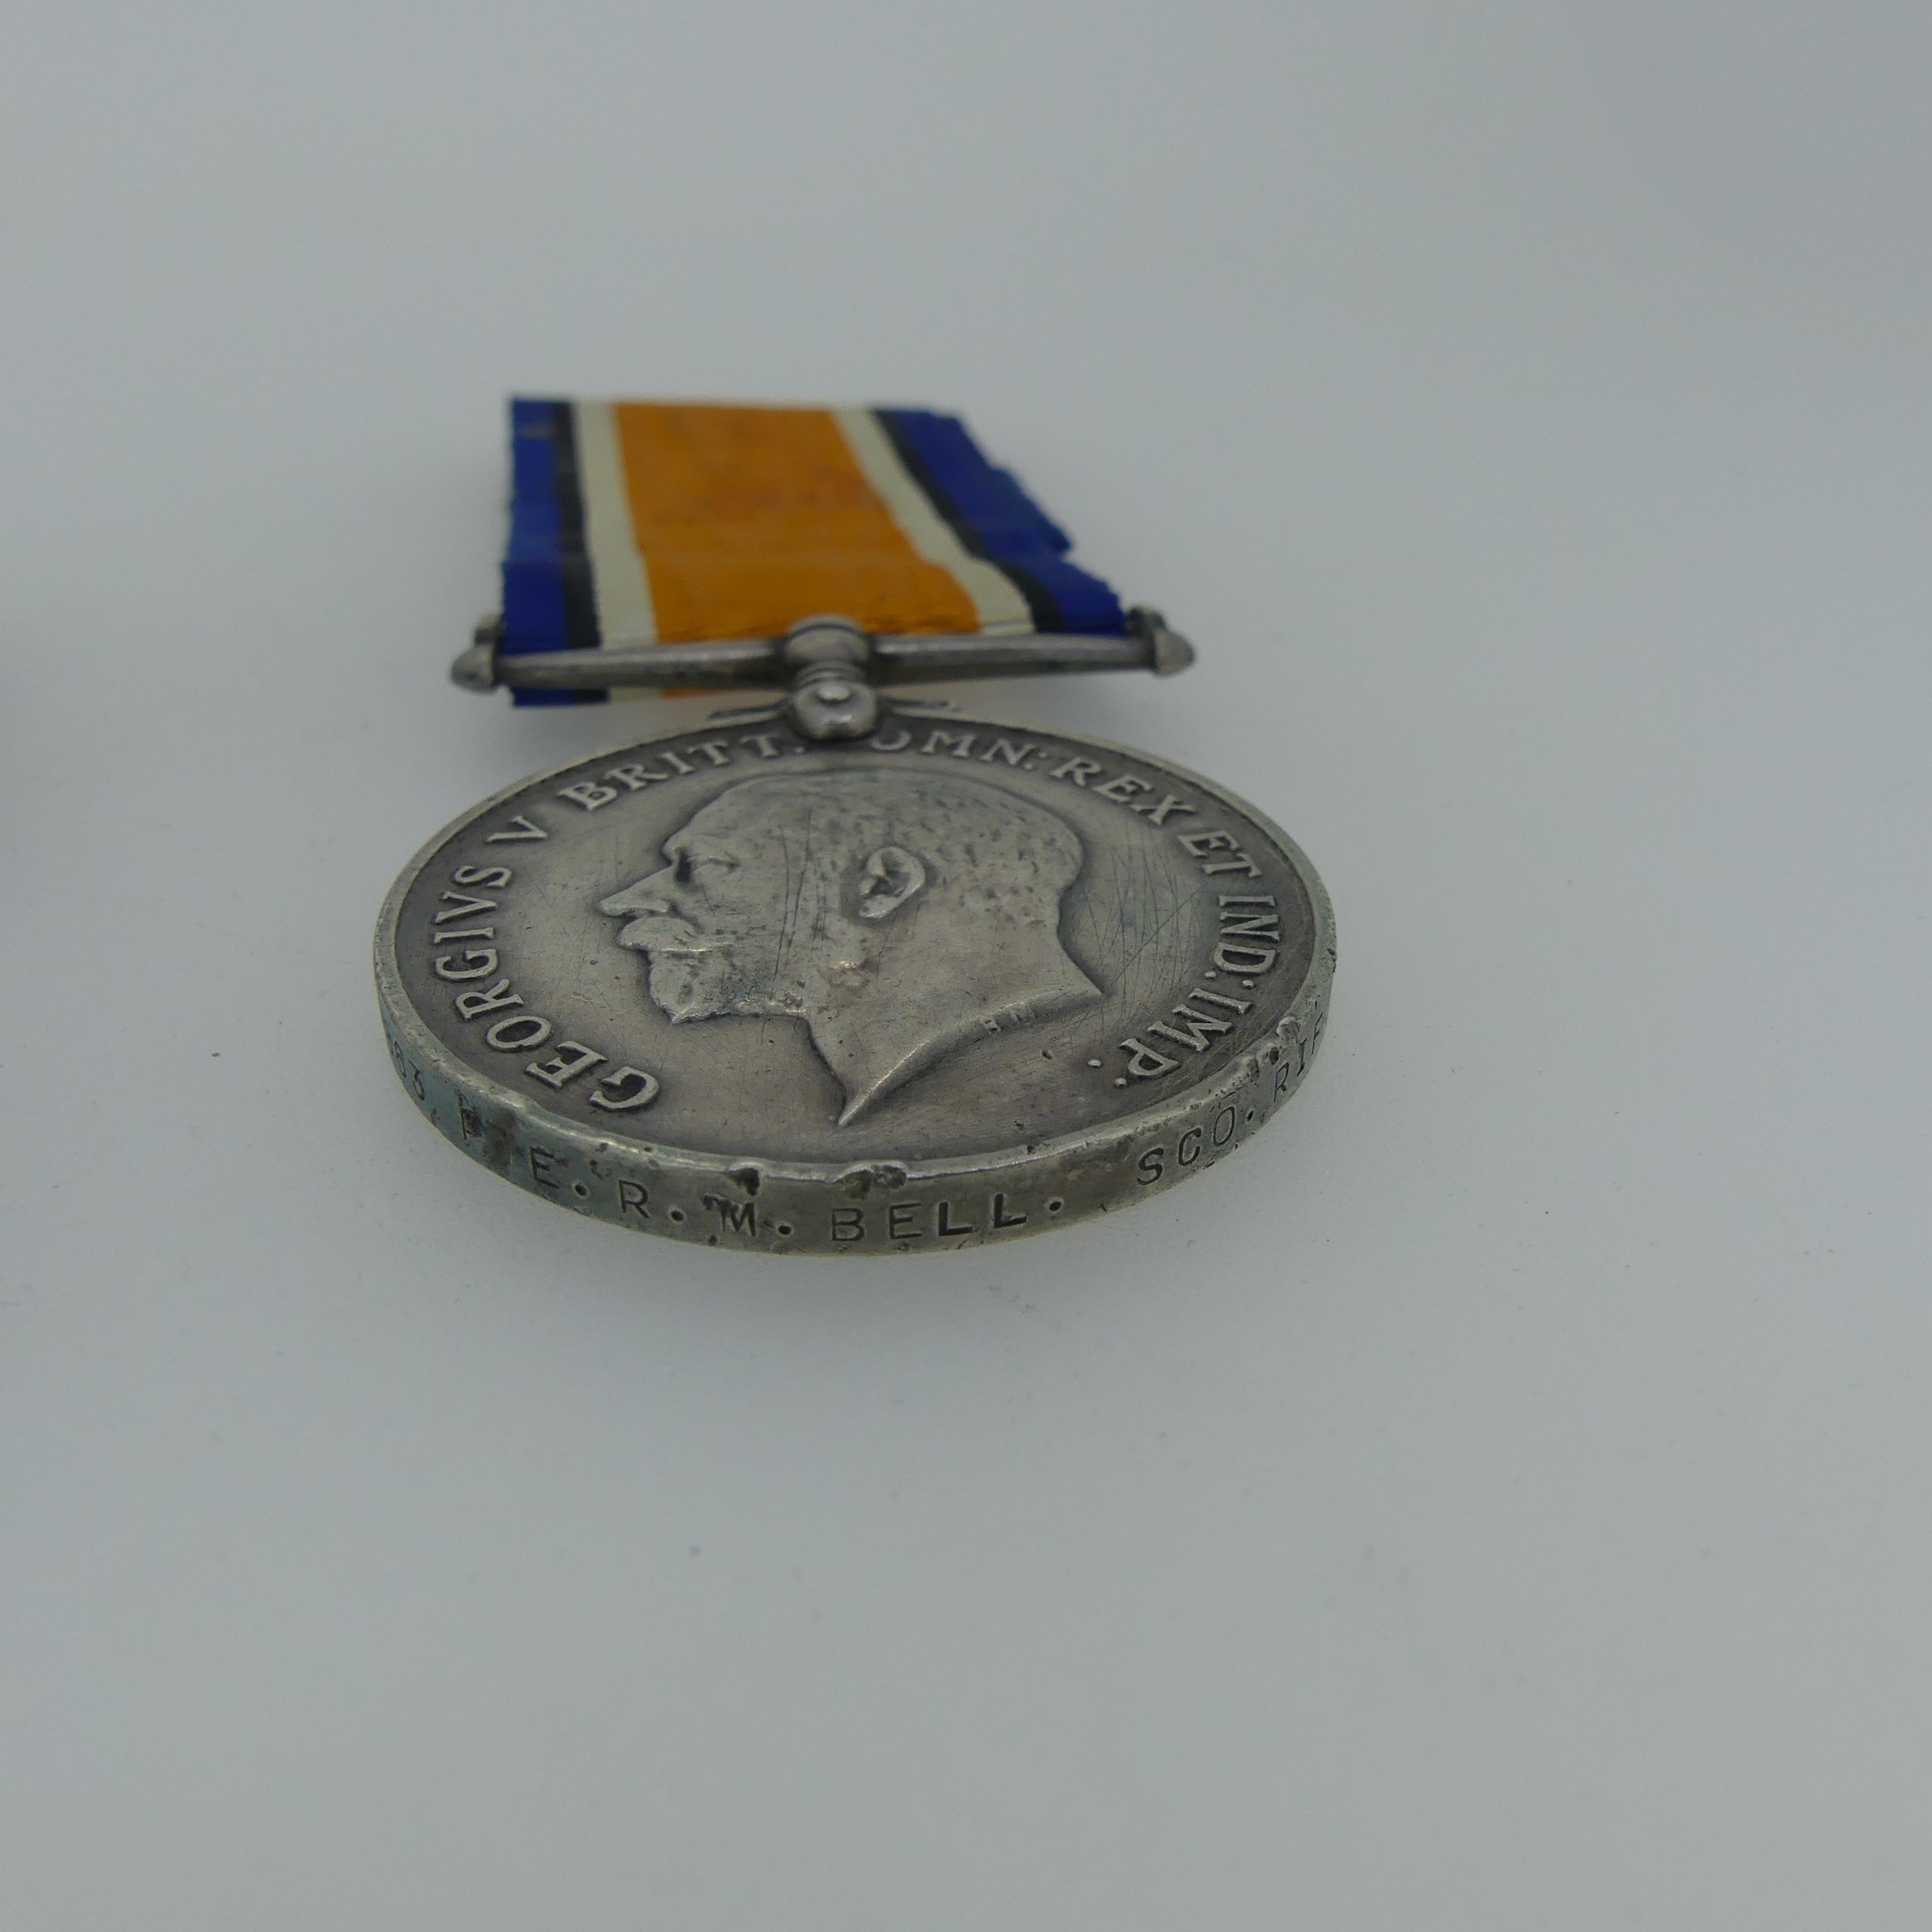 British War Medals (2) 25424 Pte. W. Gibbons Scottish Rifles and 20863 Pte. R. M. Bell Scottish - Image 3 of 4